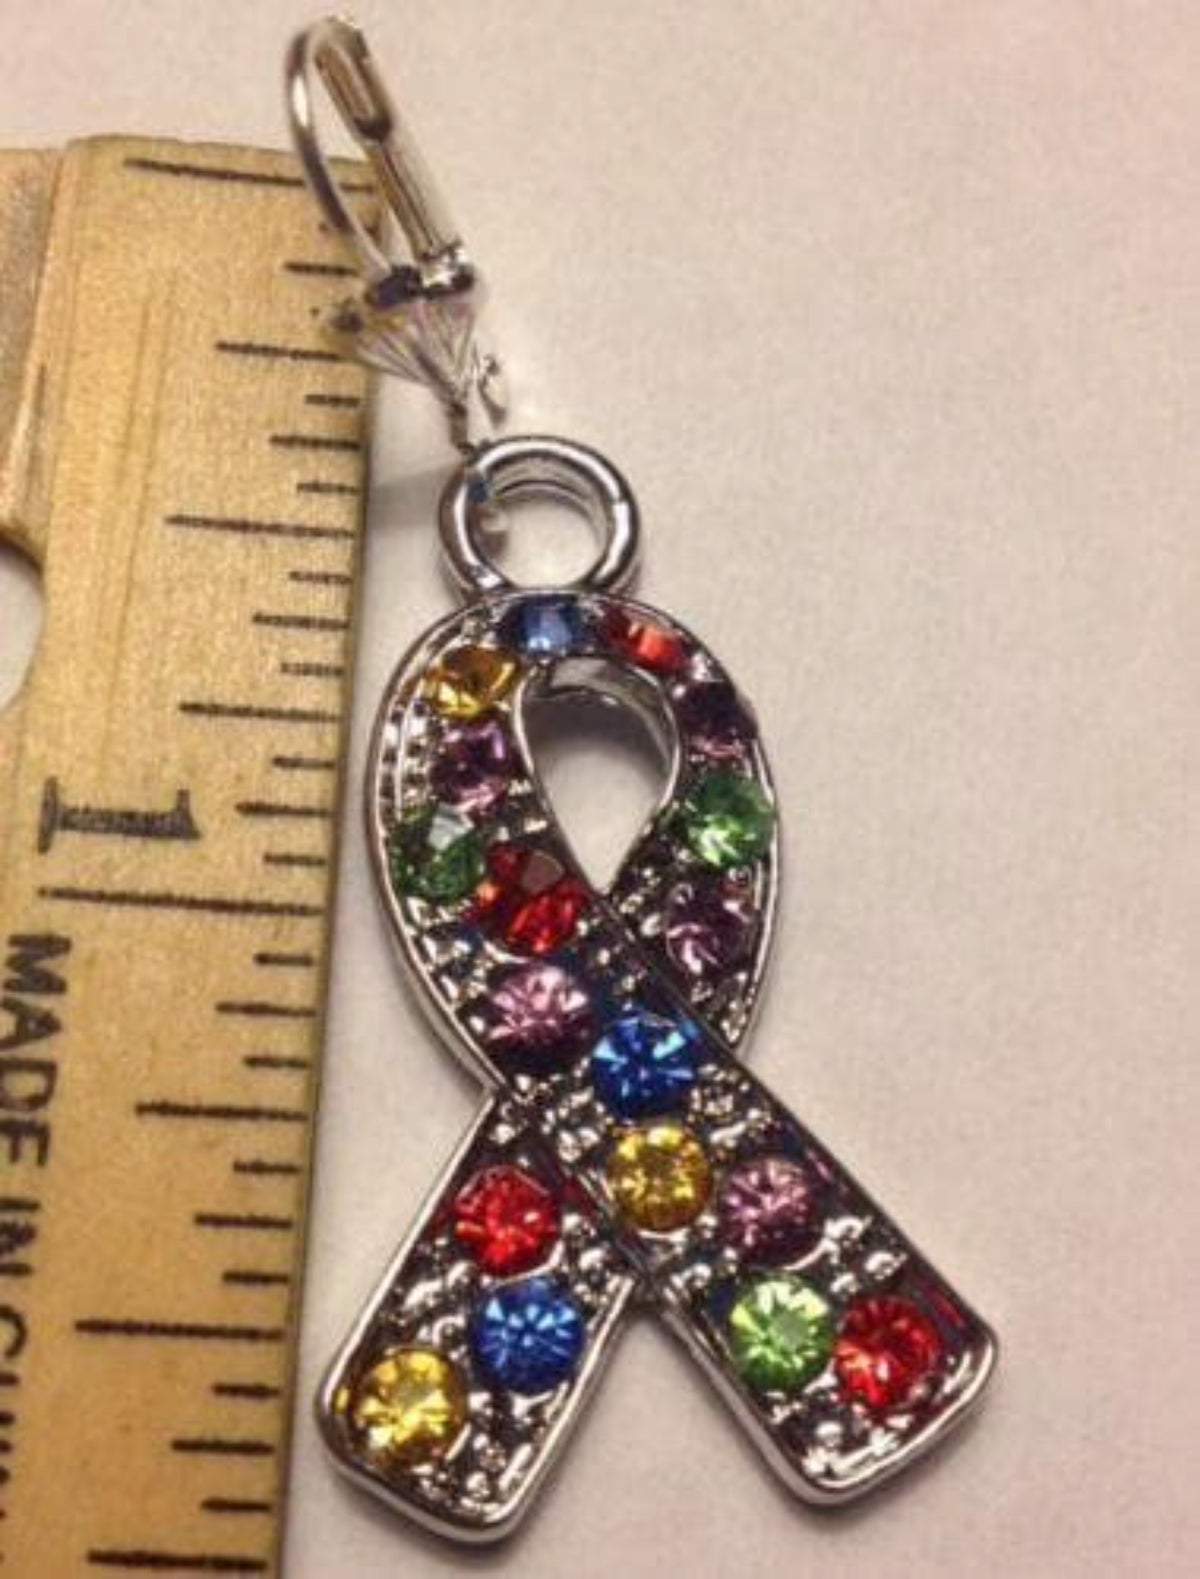 Autism Awareness Crystal Silver Ribbon Earrings - The House of Awareness